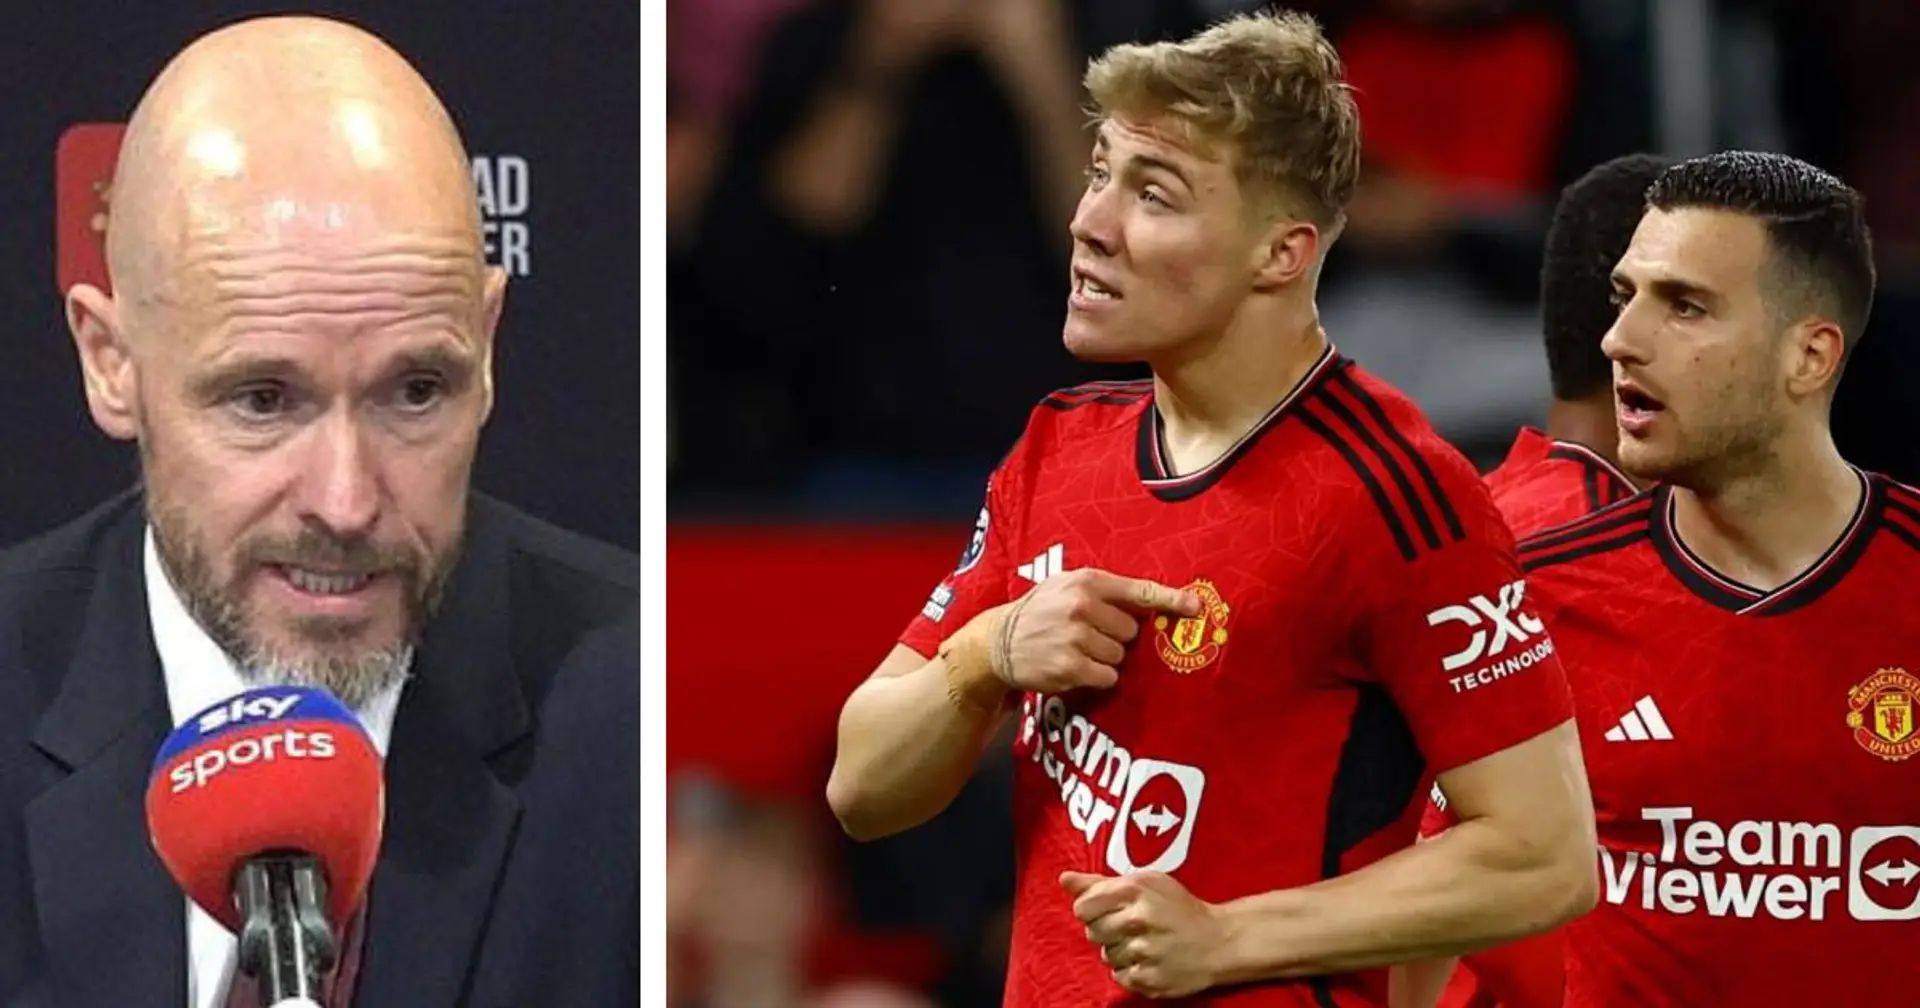 Ten Hag: 'Man United players are so hungry, so desperate to play FA Cup final'